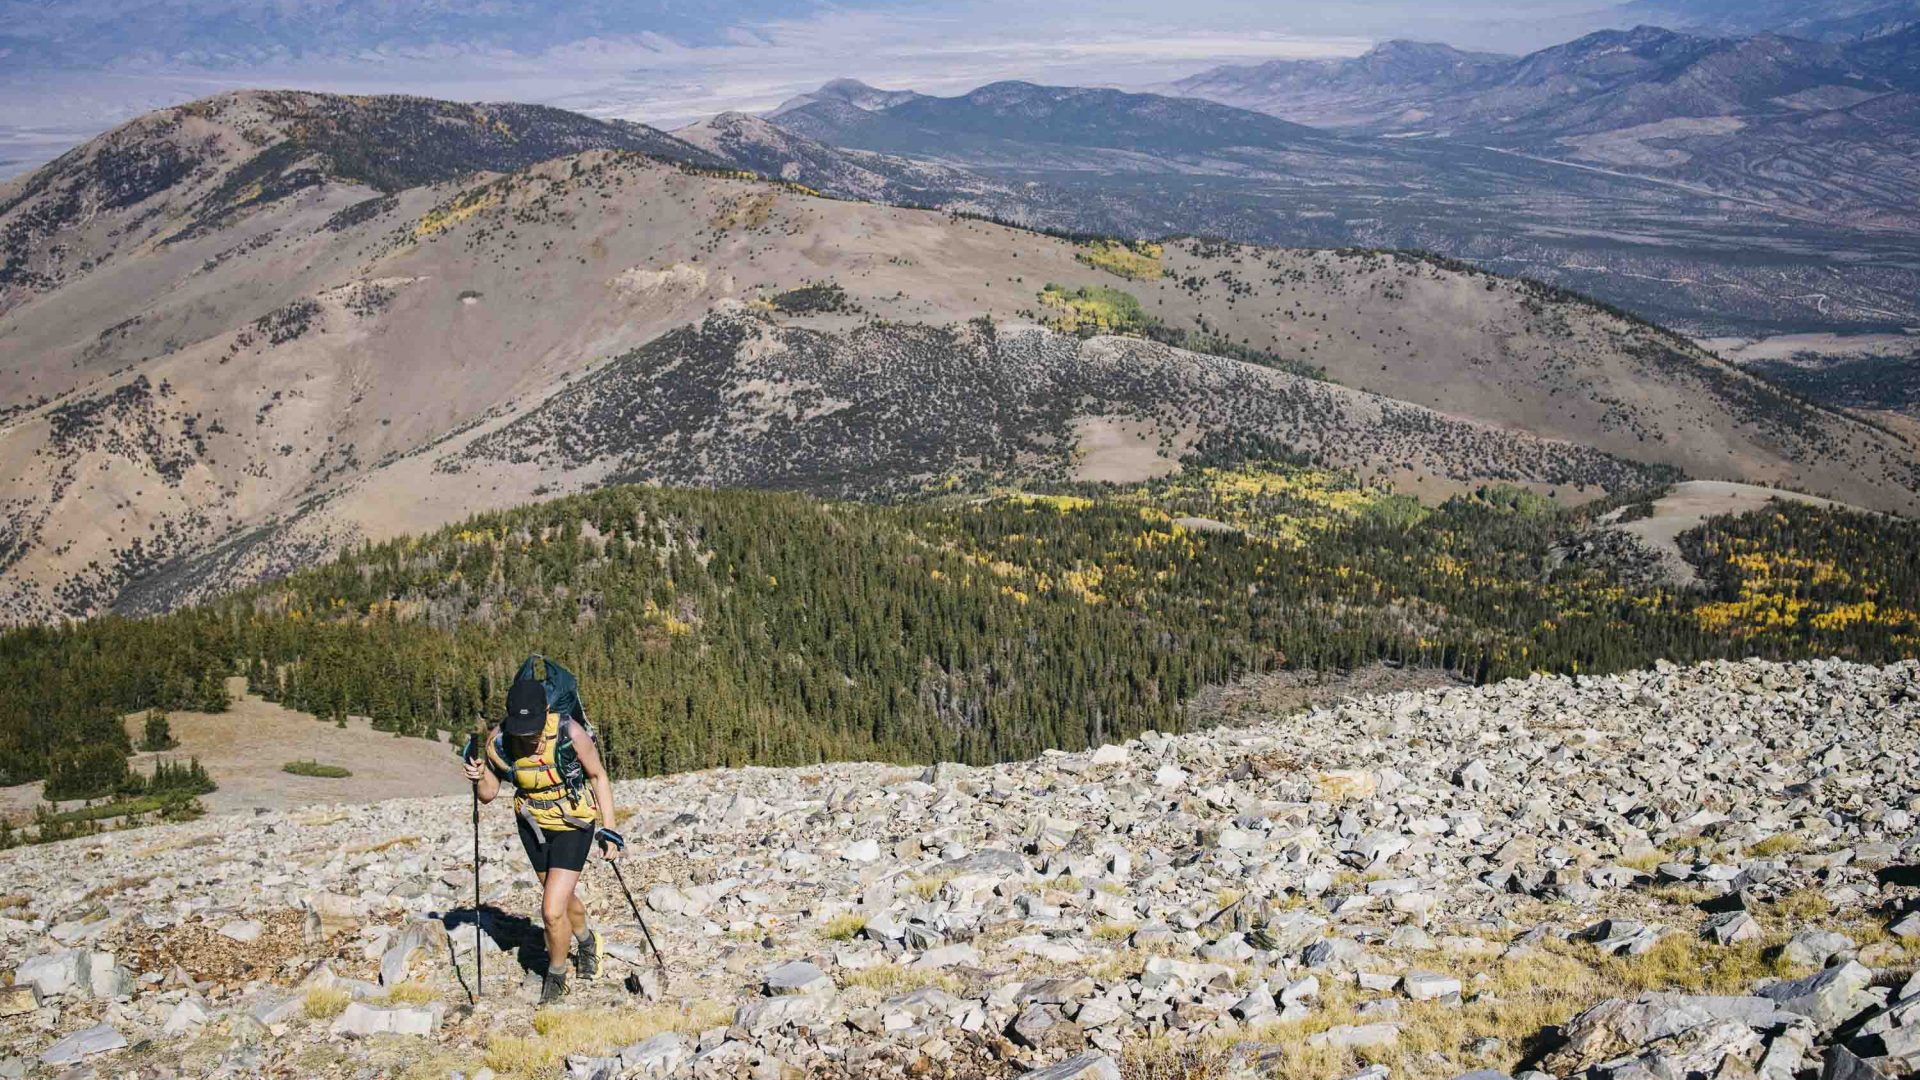 A woman hikes up a rocky hill with trees in the background.